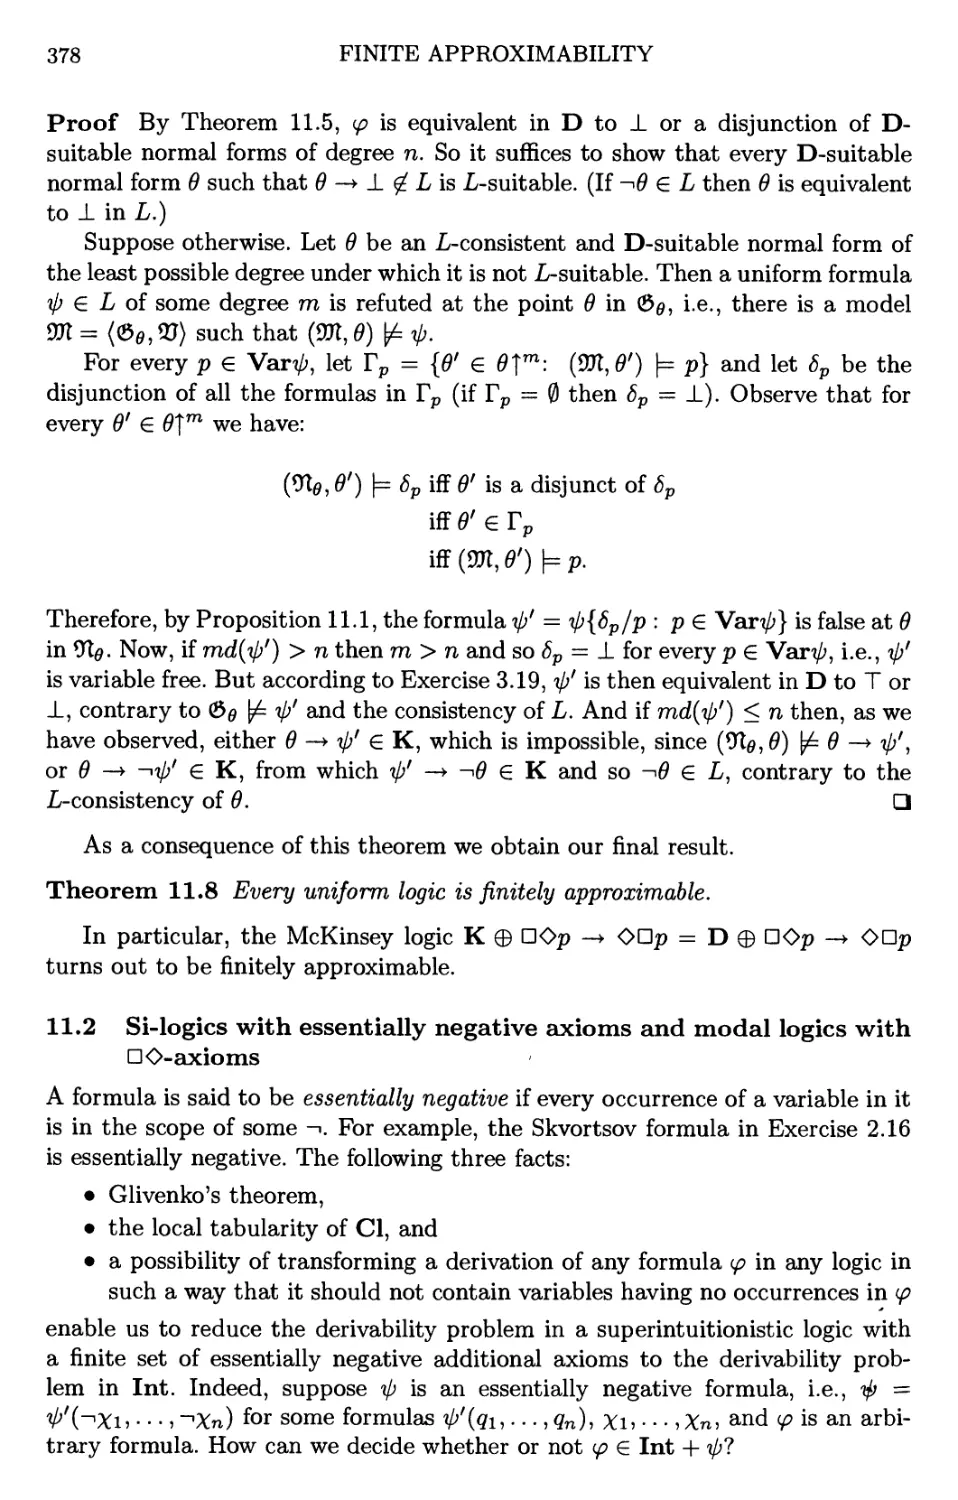 11.2 Si-logics with essentially negative axioms and modal logics with Box-Diamond-axioms